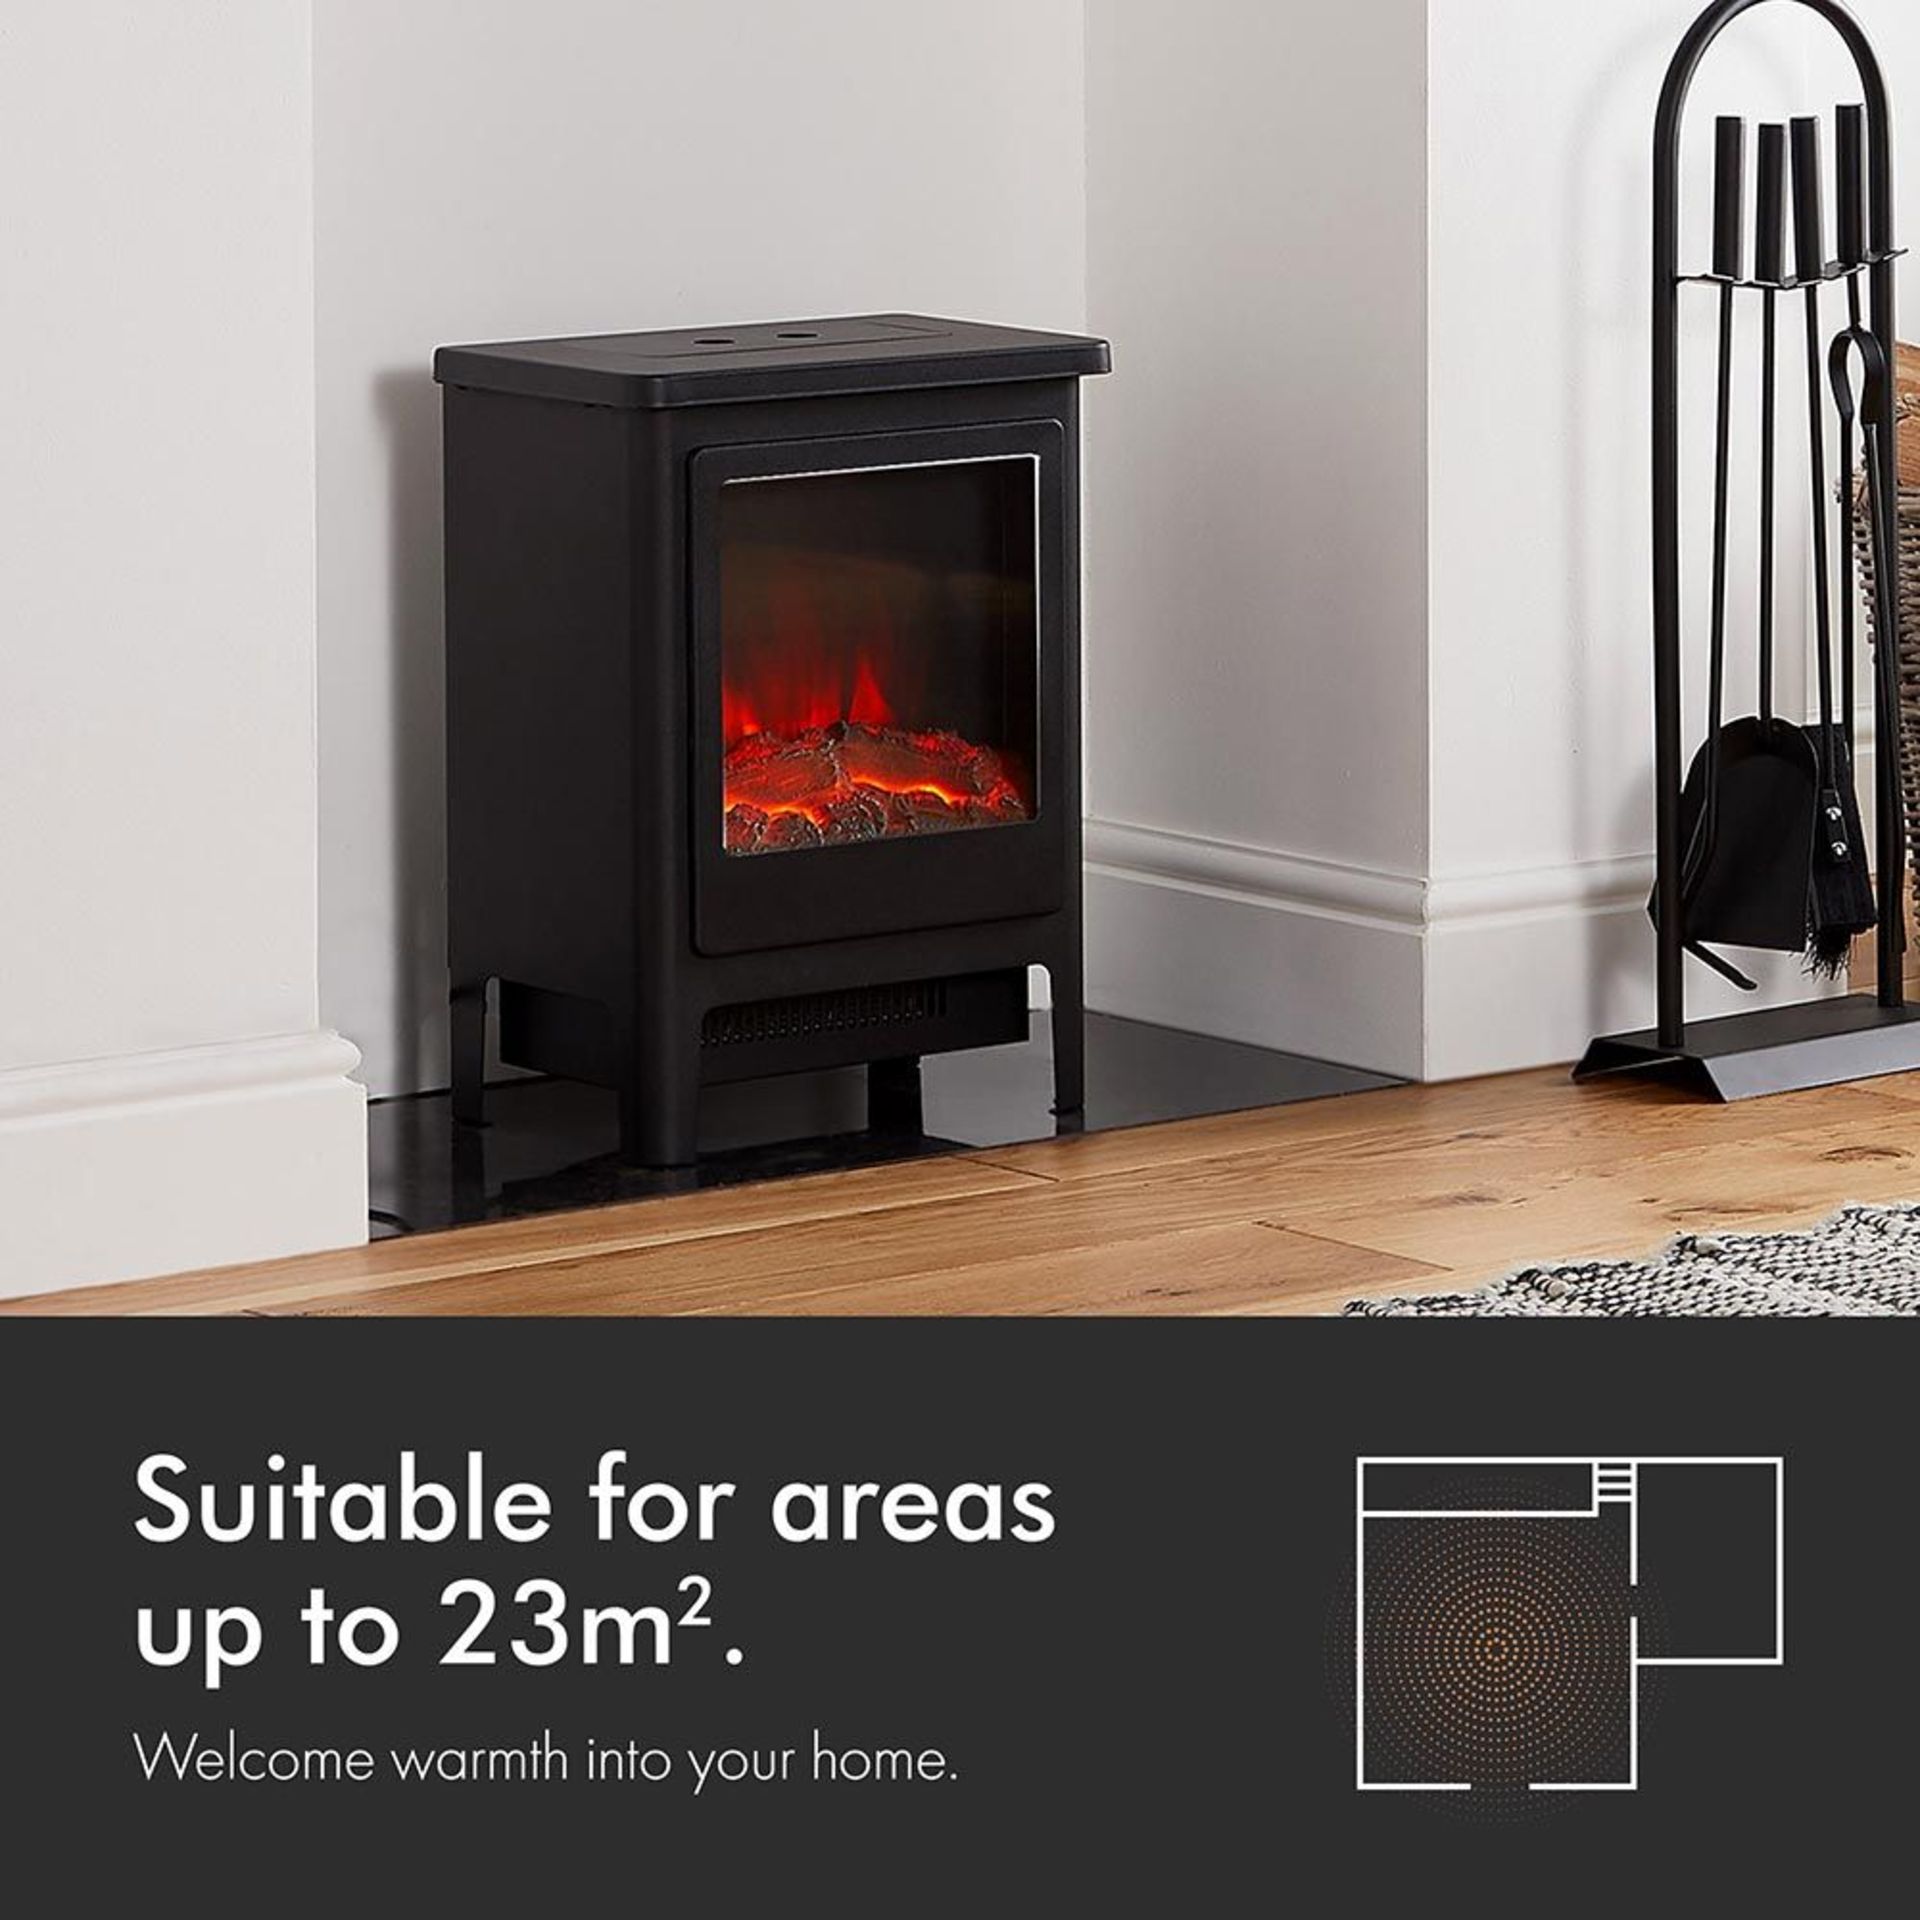 (AP243) 1900W Contemporary Stove Heater The large window displays a realistic LED log fire F...